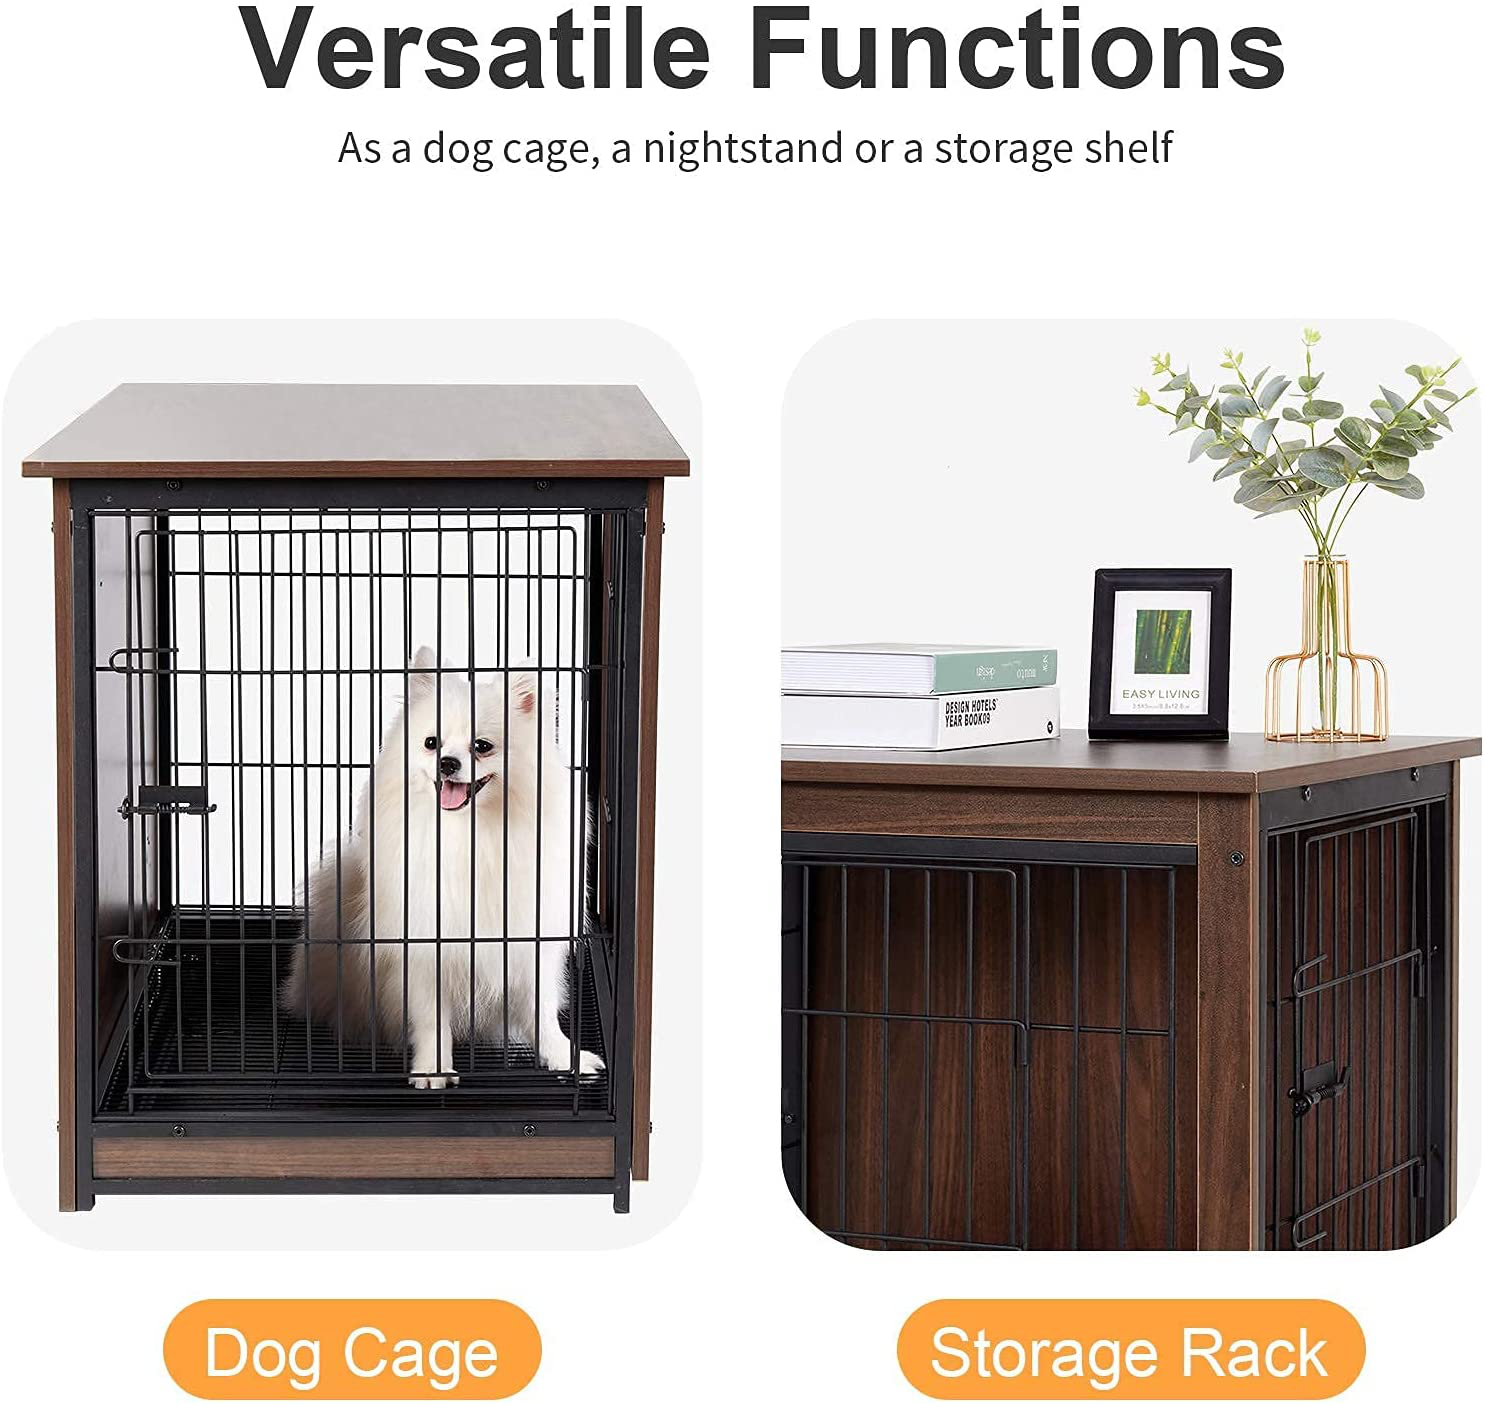 Bingopaw End Table Dog Crate with Double Door,Wooden Pet Kennel with Floor Tray, Top Detachable, Indoor Dog House for Small Medium Dogs